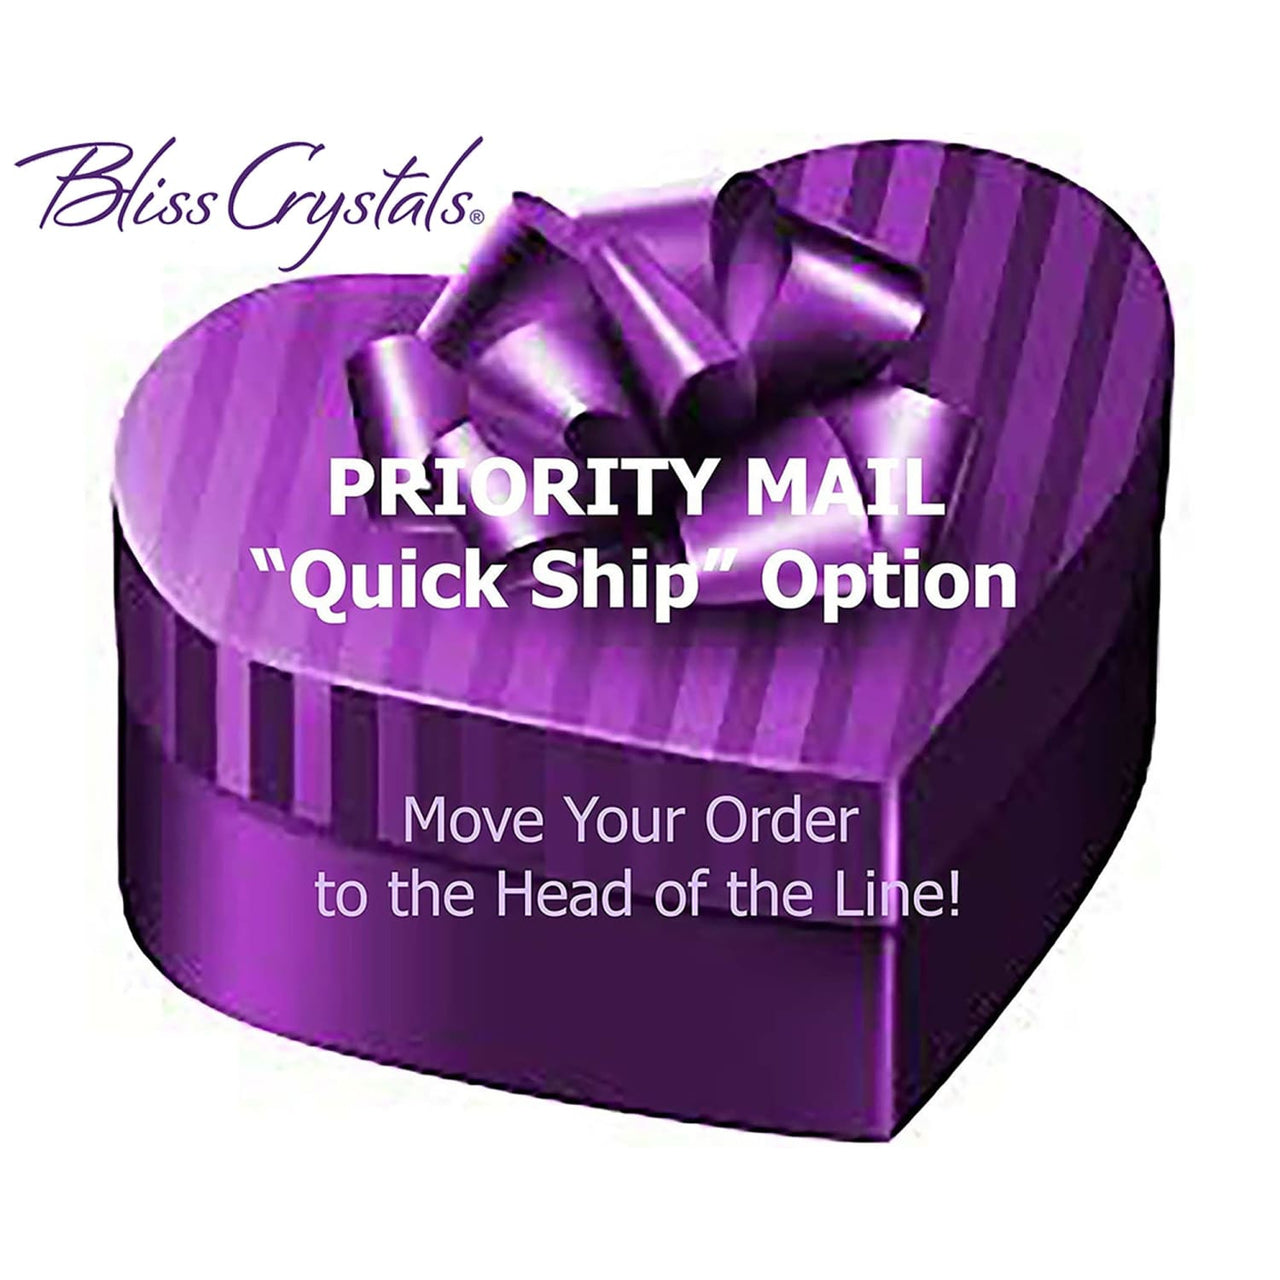 Upgrade to QUICK SHIP Priority Mail Option - Get to the head